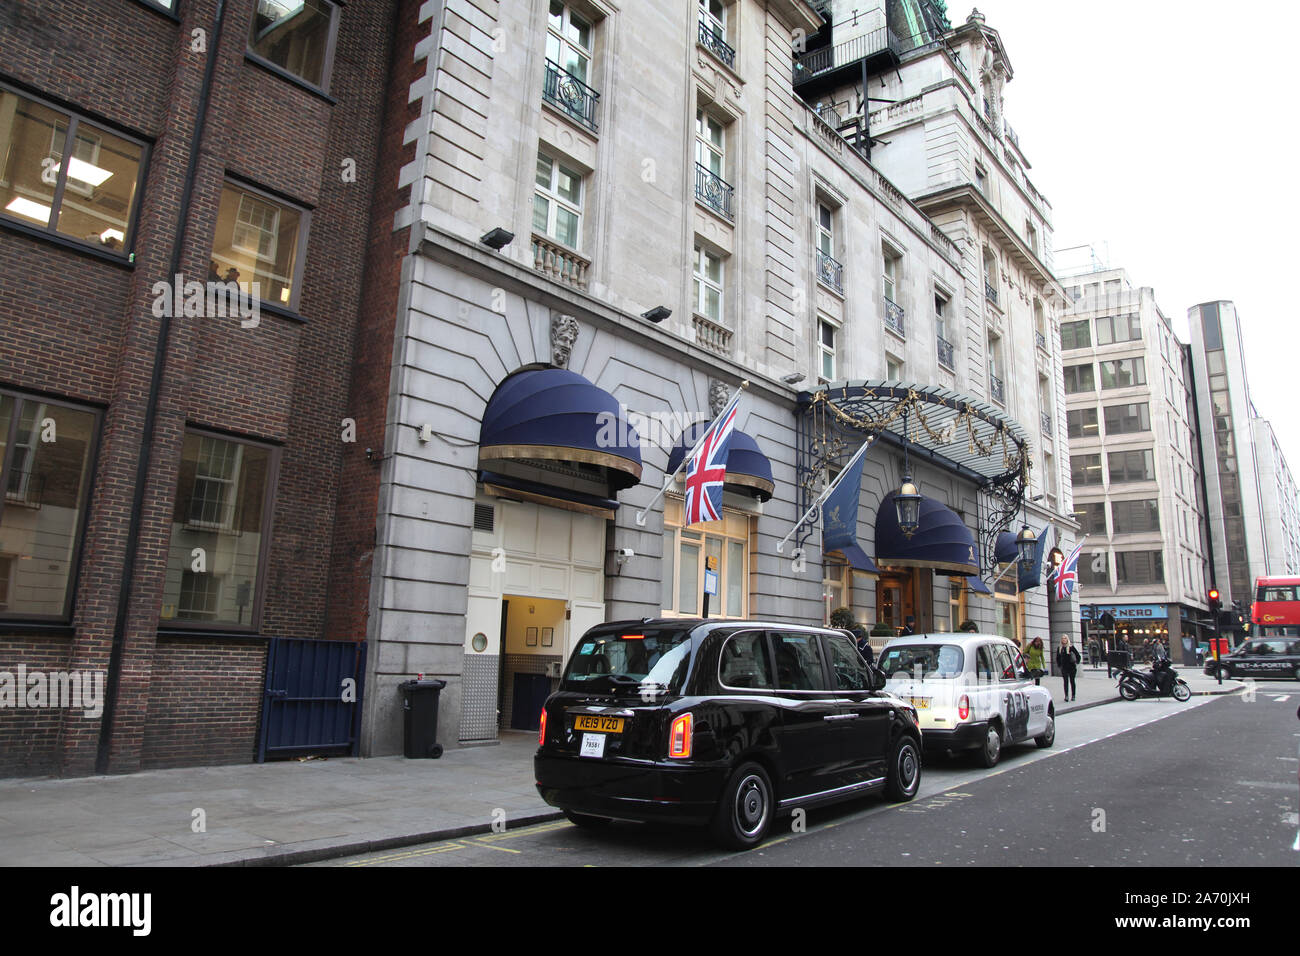 Entrance to The Ritz Hotel looking North on Arlington Street, Mayfair, London, black taxi cab parked outside Ritz hotel Stock Photo